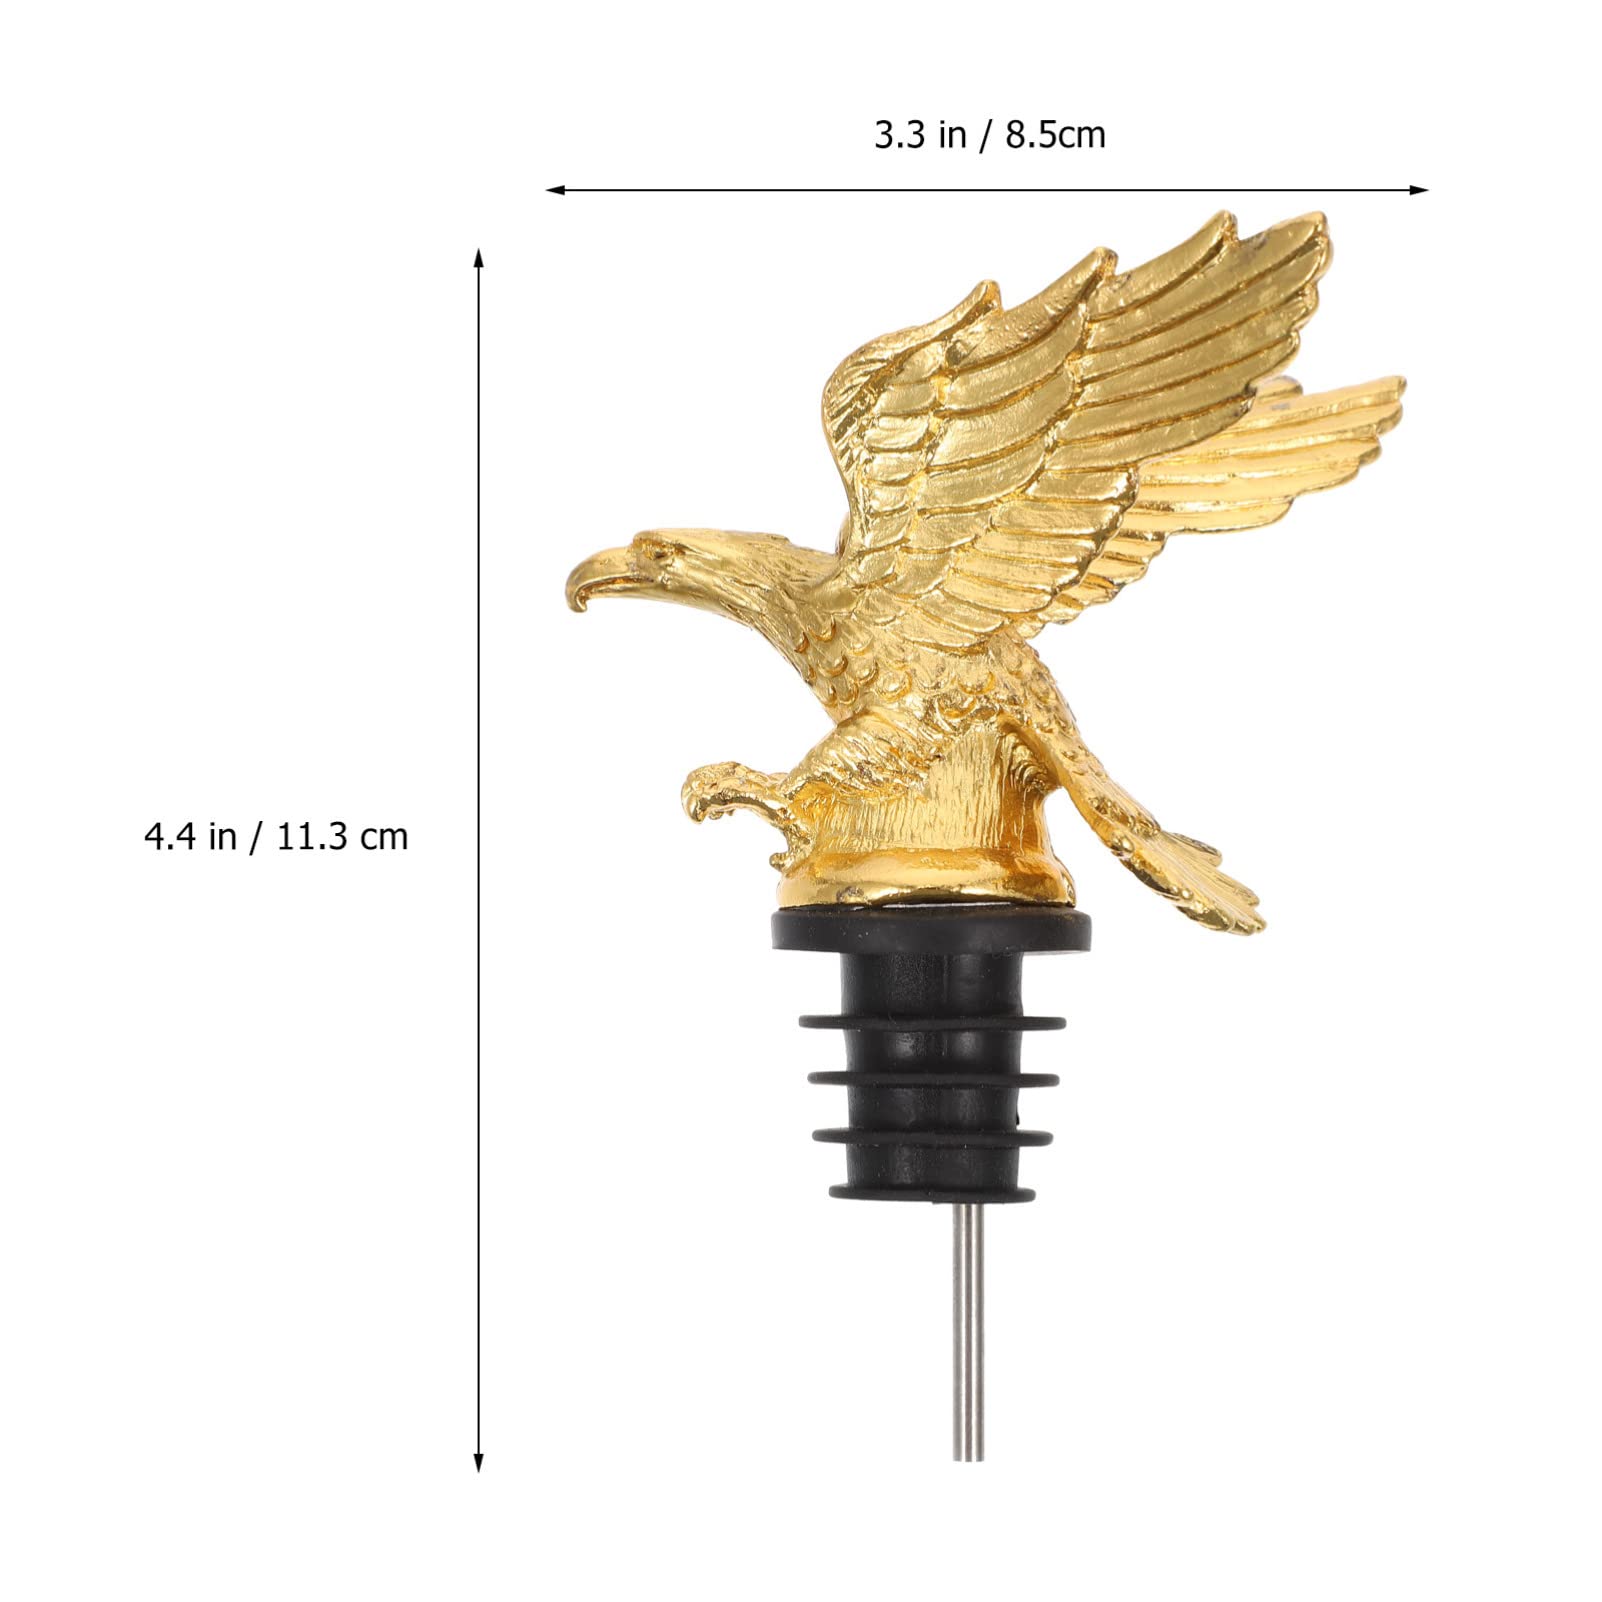 Hemoton Wine Pourer Spout Alloy Eagle Wine Bottle Stopper Liquor Pourers Animal Wine Aerator Wine Purifier Gifts for Christmas New Year Golden